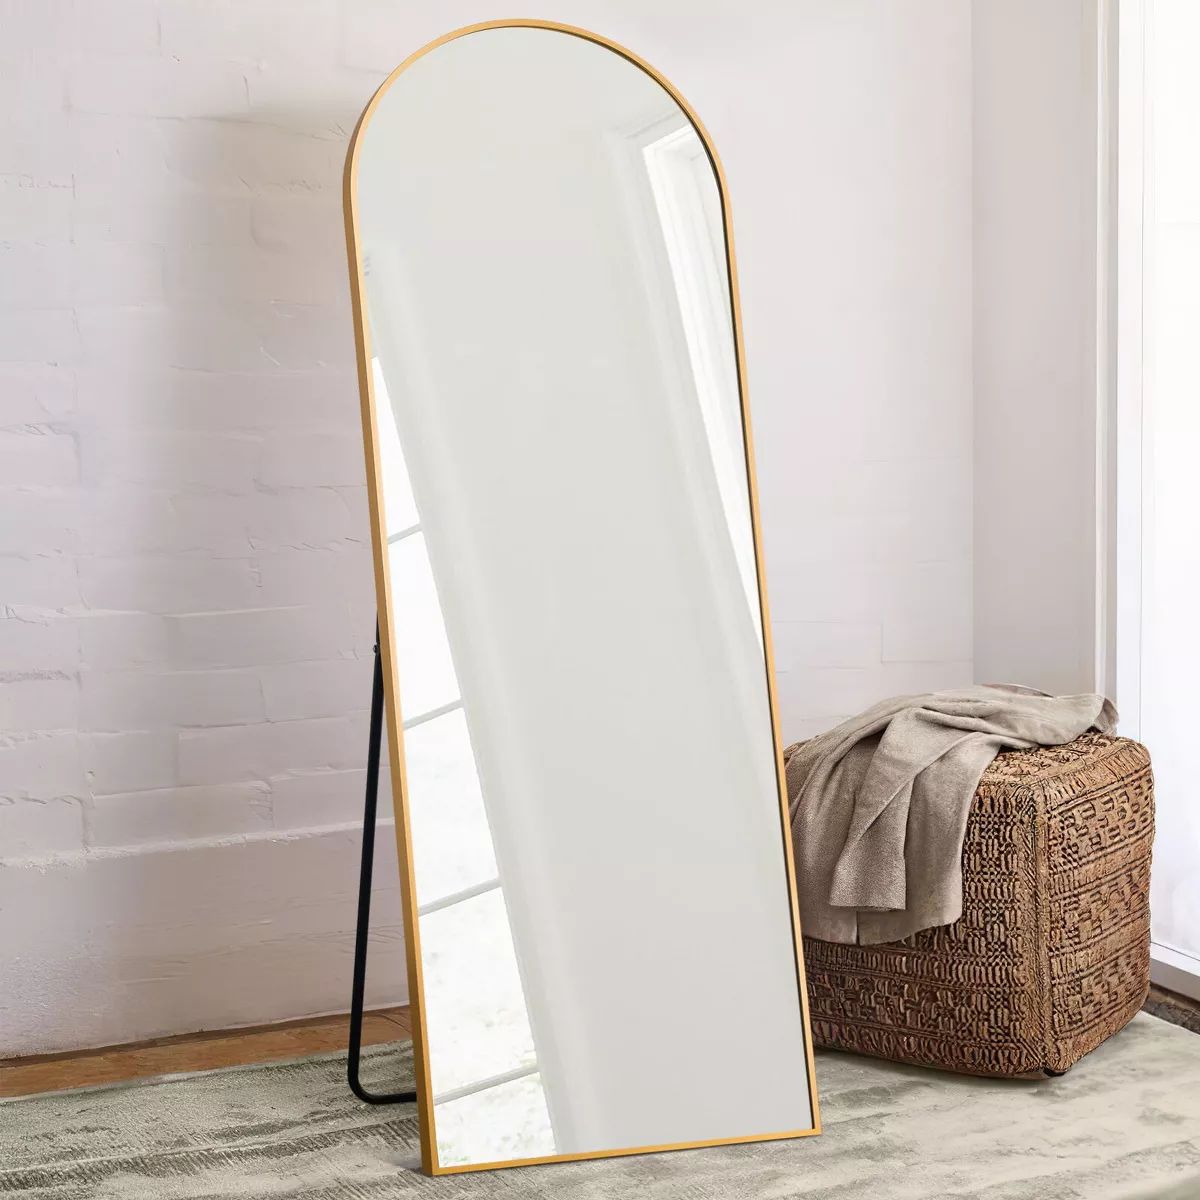 Malinda 64" x 21" Arched Free Standing Body Mirror, Metal Framed Full Length Wall Mirror, Large F... | Target